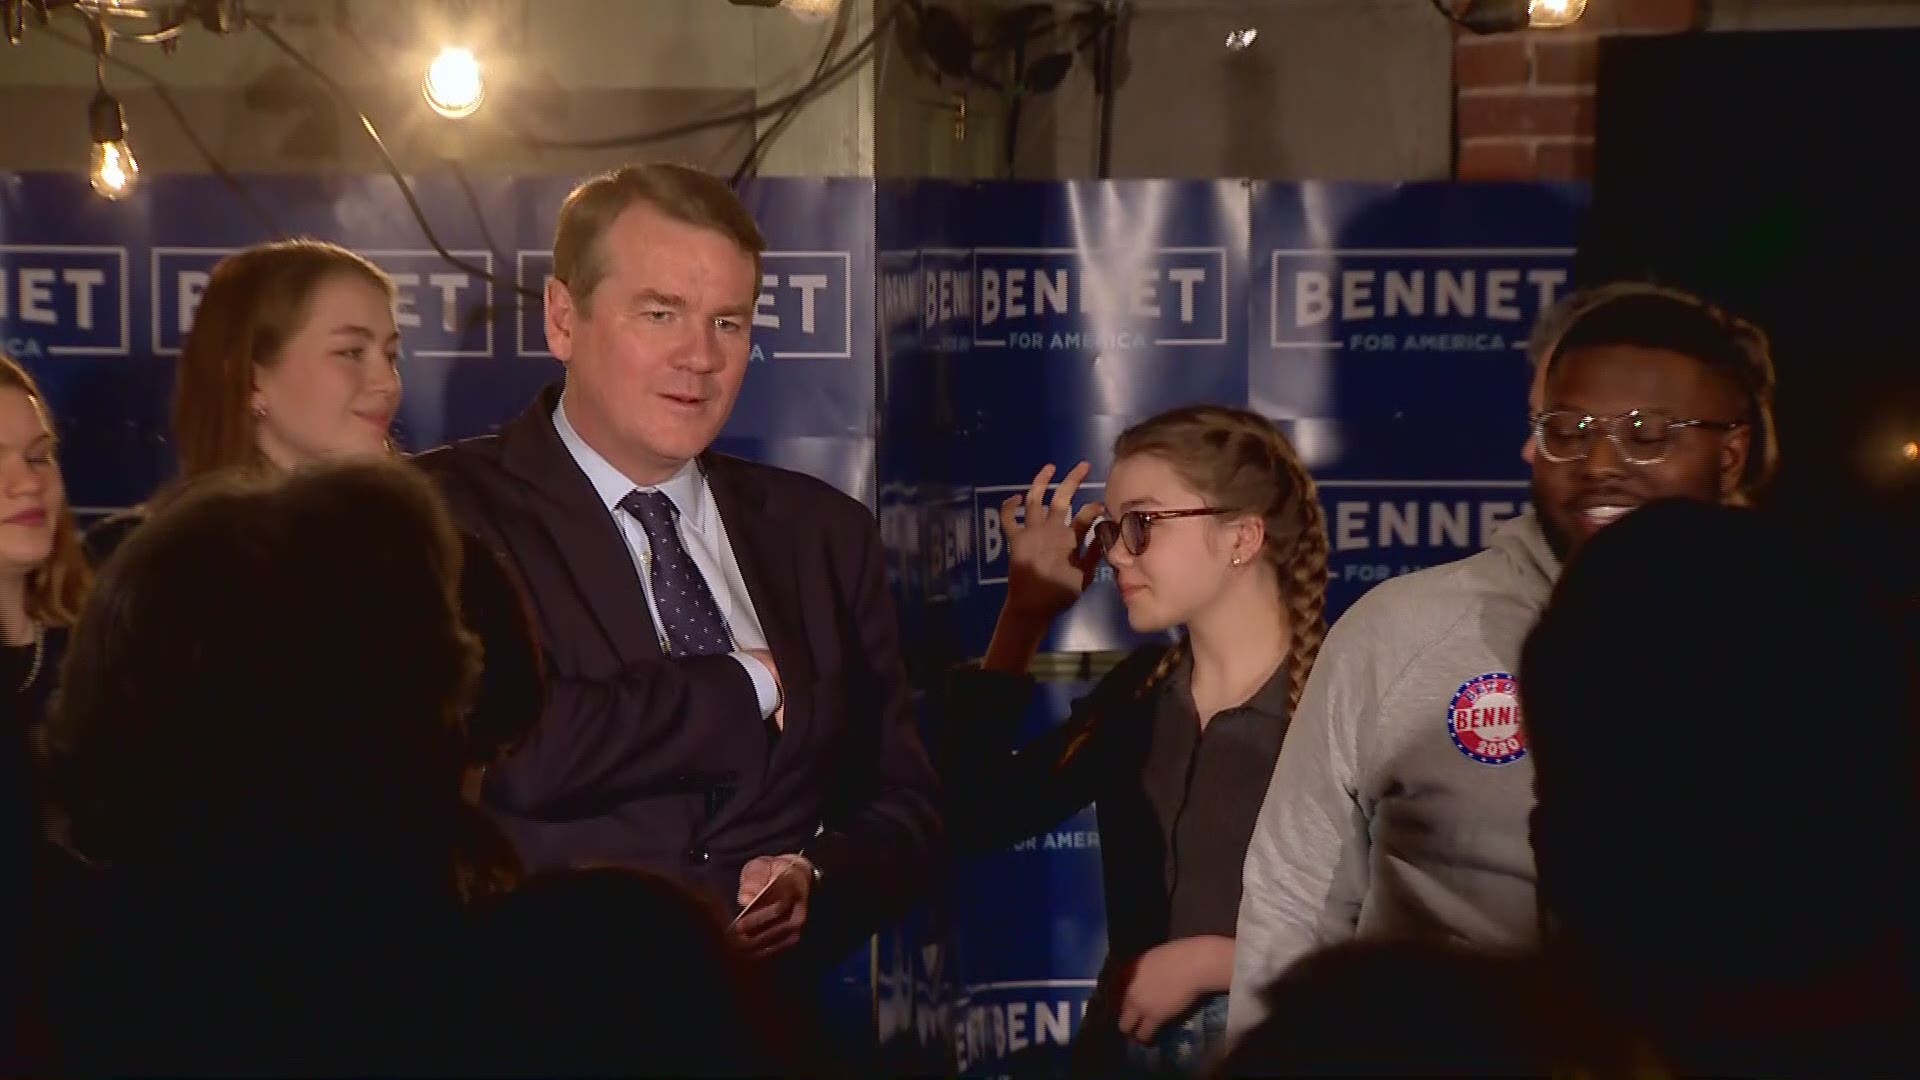 Colorado Sen. Michael Bennet is ending his campaign for president, he announced Tuesday from New Hampshire within an hour of the primary polls closing.